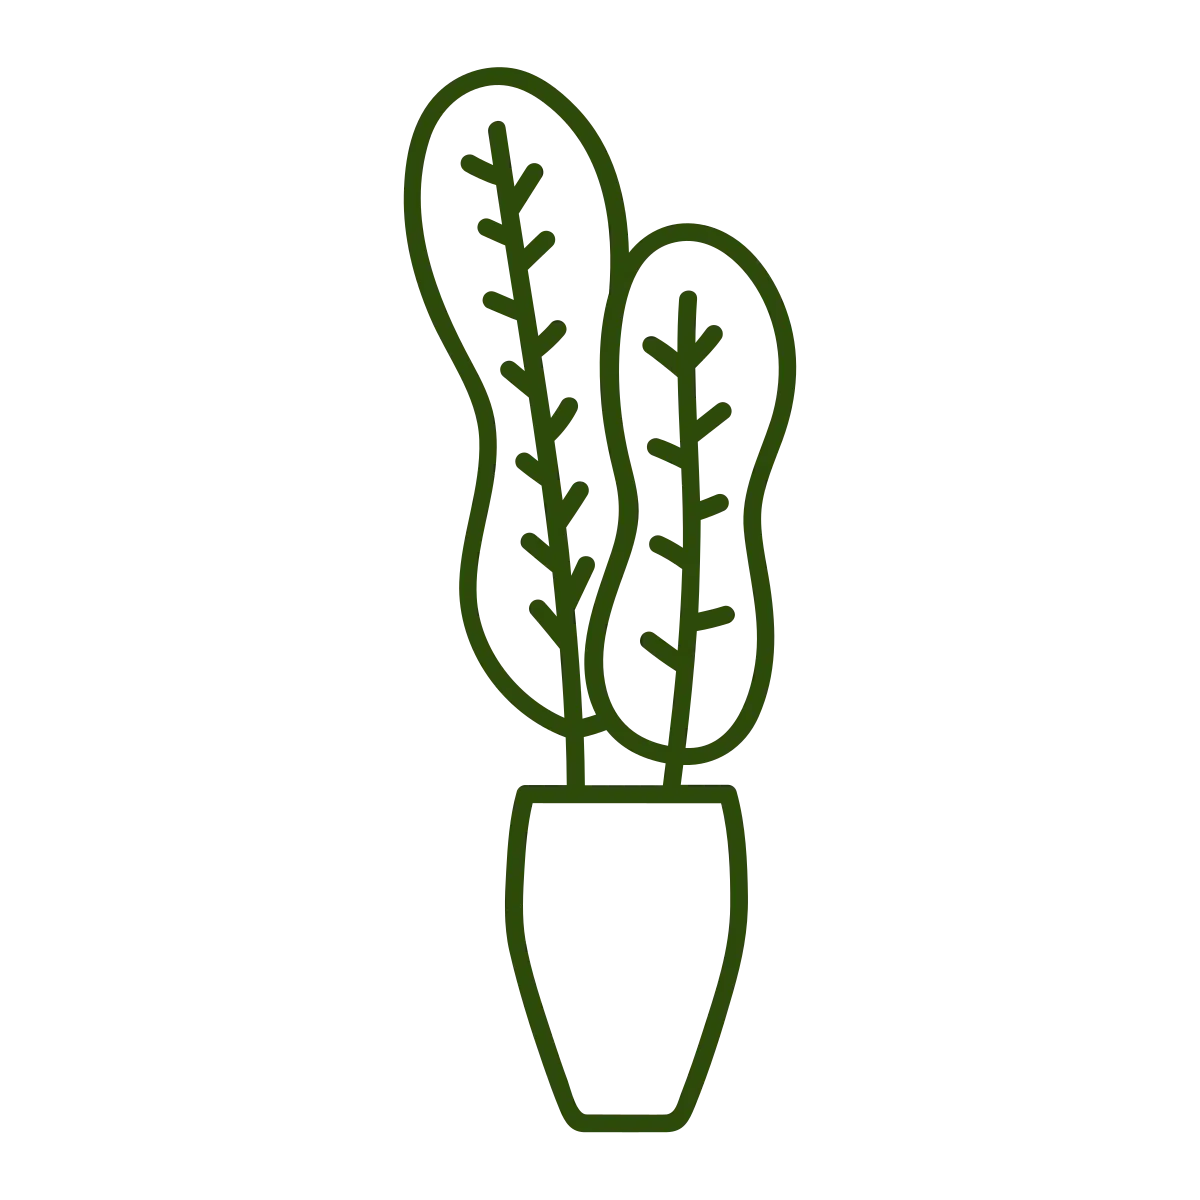 A small potted plant icon